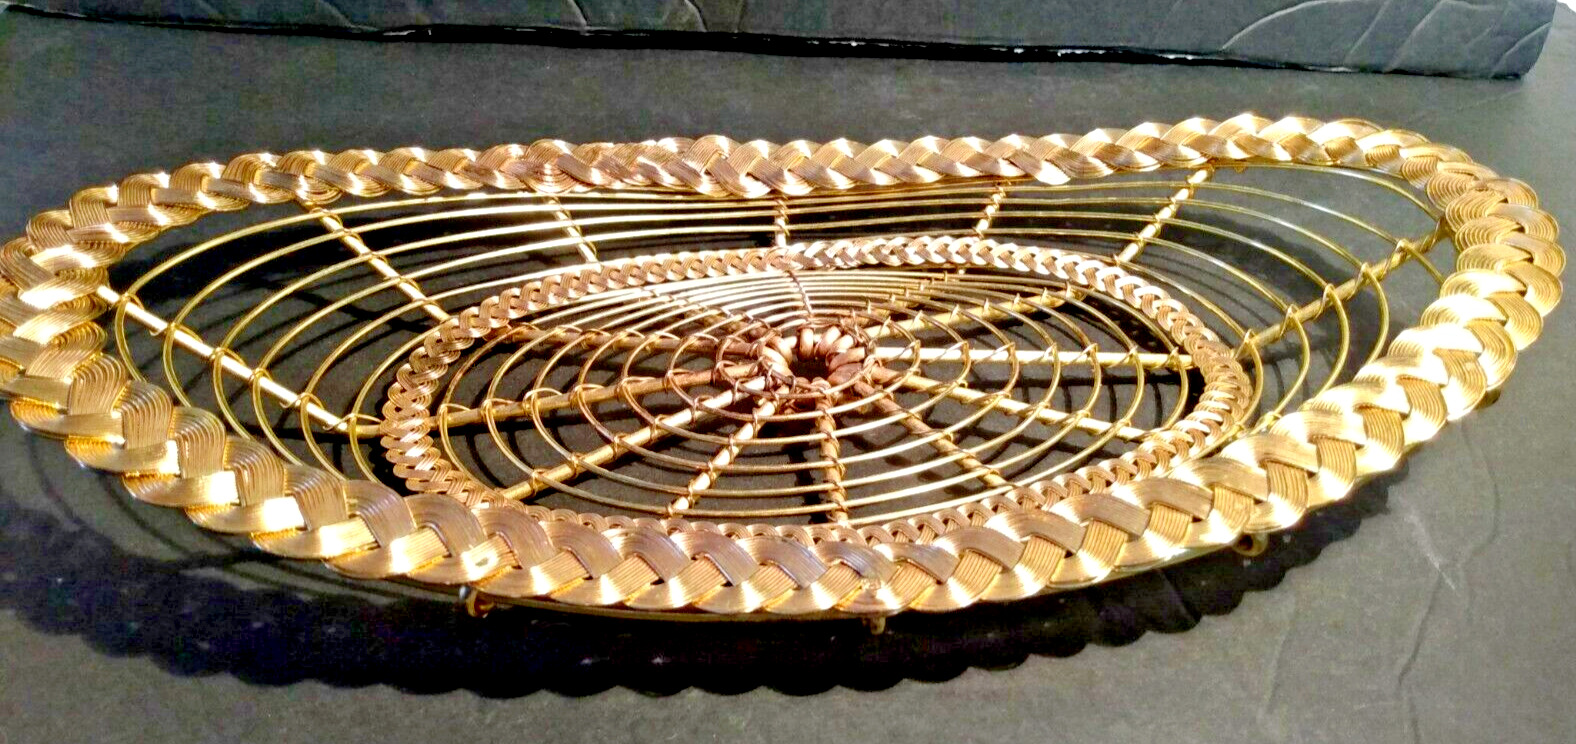 GOLD TONE WIRE FRUIT OR TRINKET BASKET WITH INTRICATE DESIGN OVAL SHAPE UNUSUAL